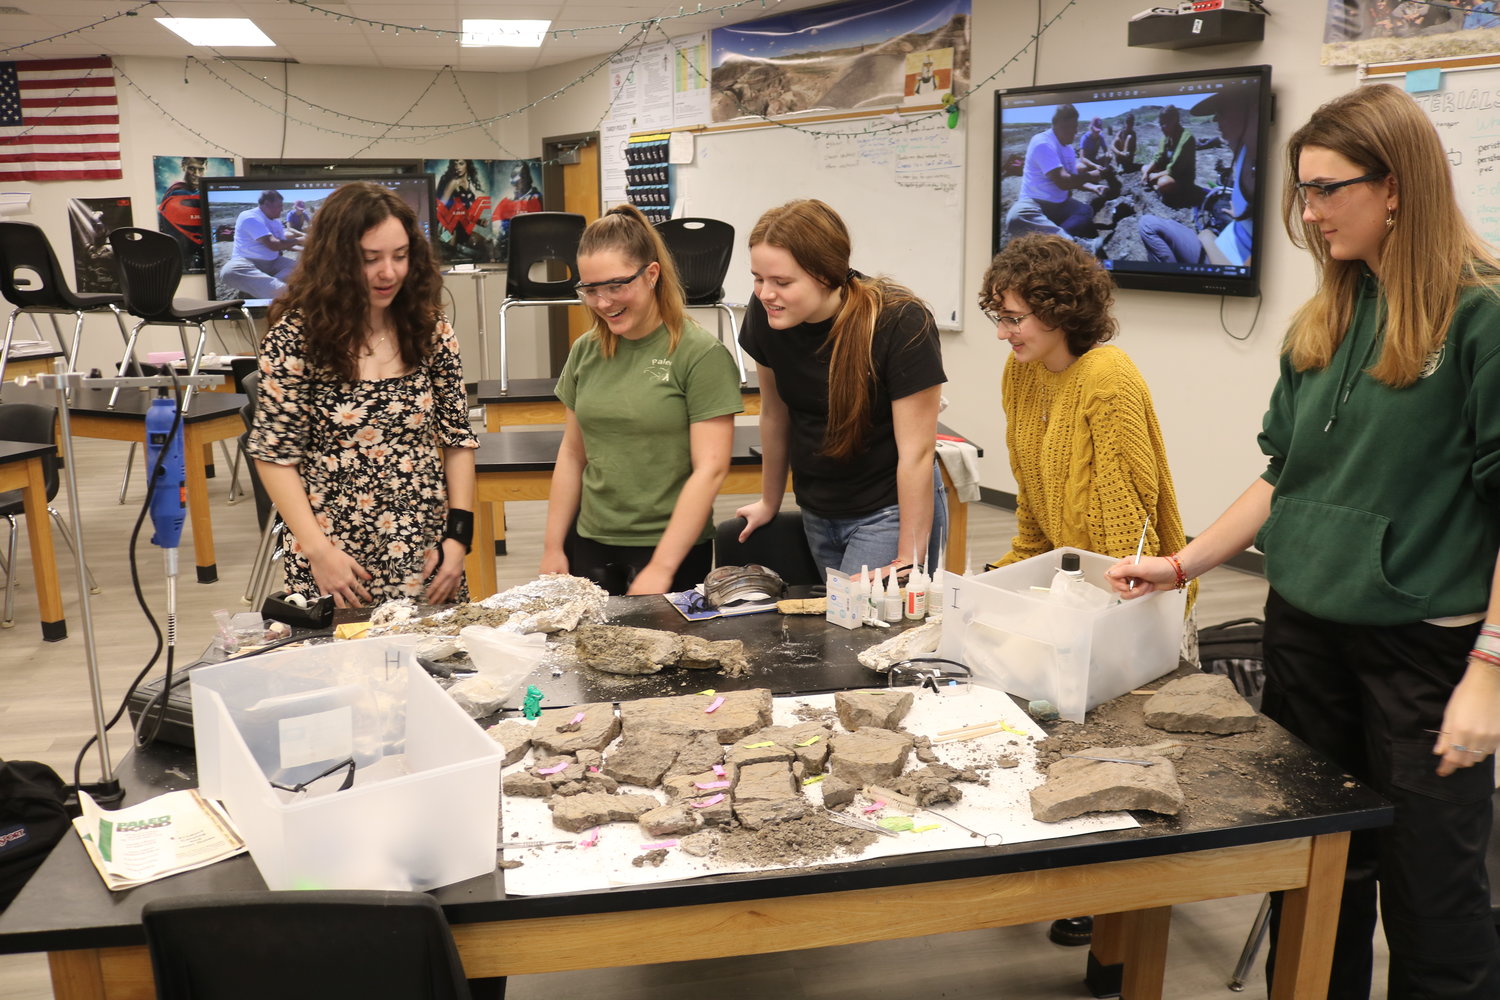 Members of the Nease High paleo club unwrap and clean fossilized dinosaur bones. The club is currently learning the cleaning and preserving process prior to their trip to Montana in July to search for dinosaur fossils themselves.